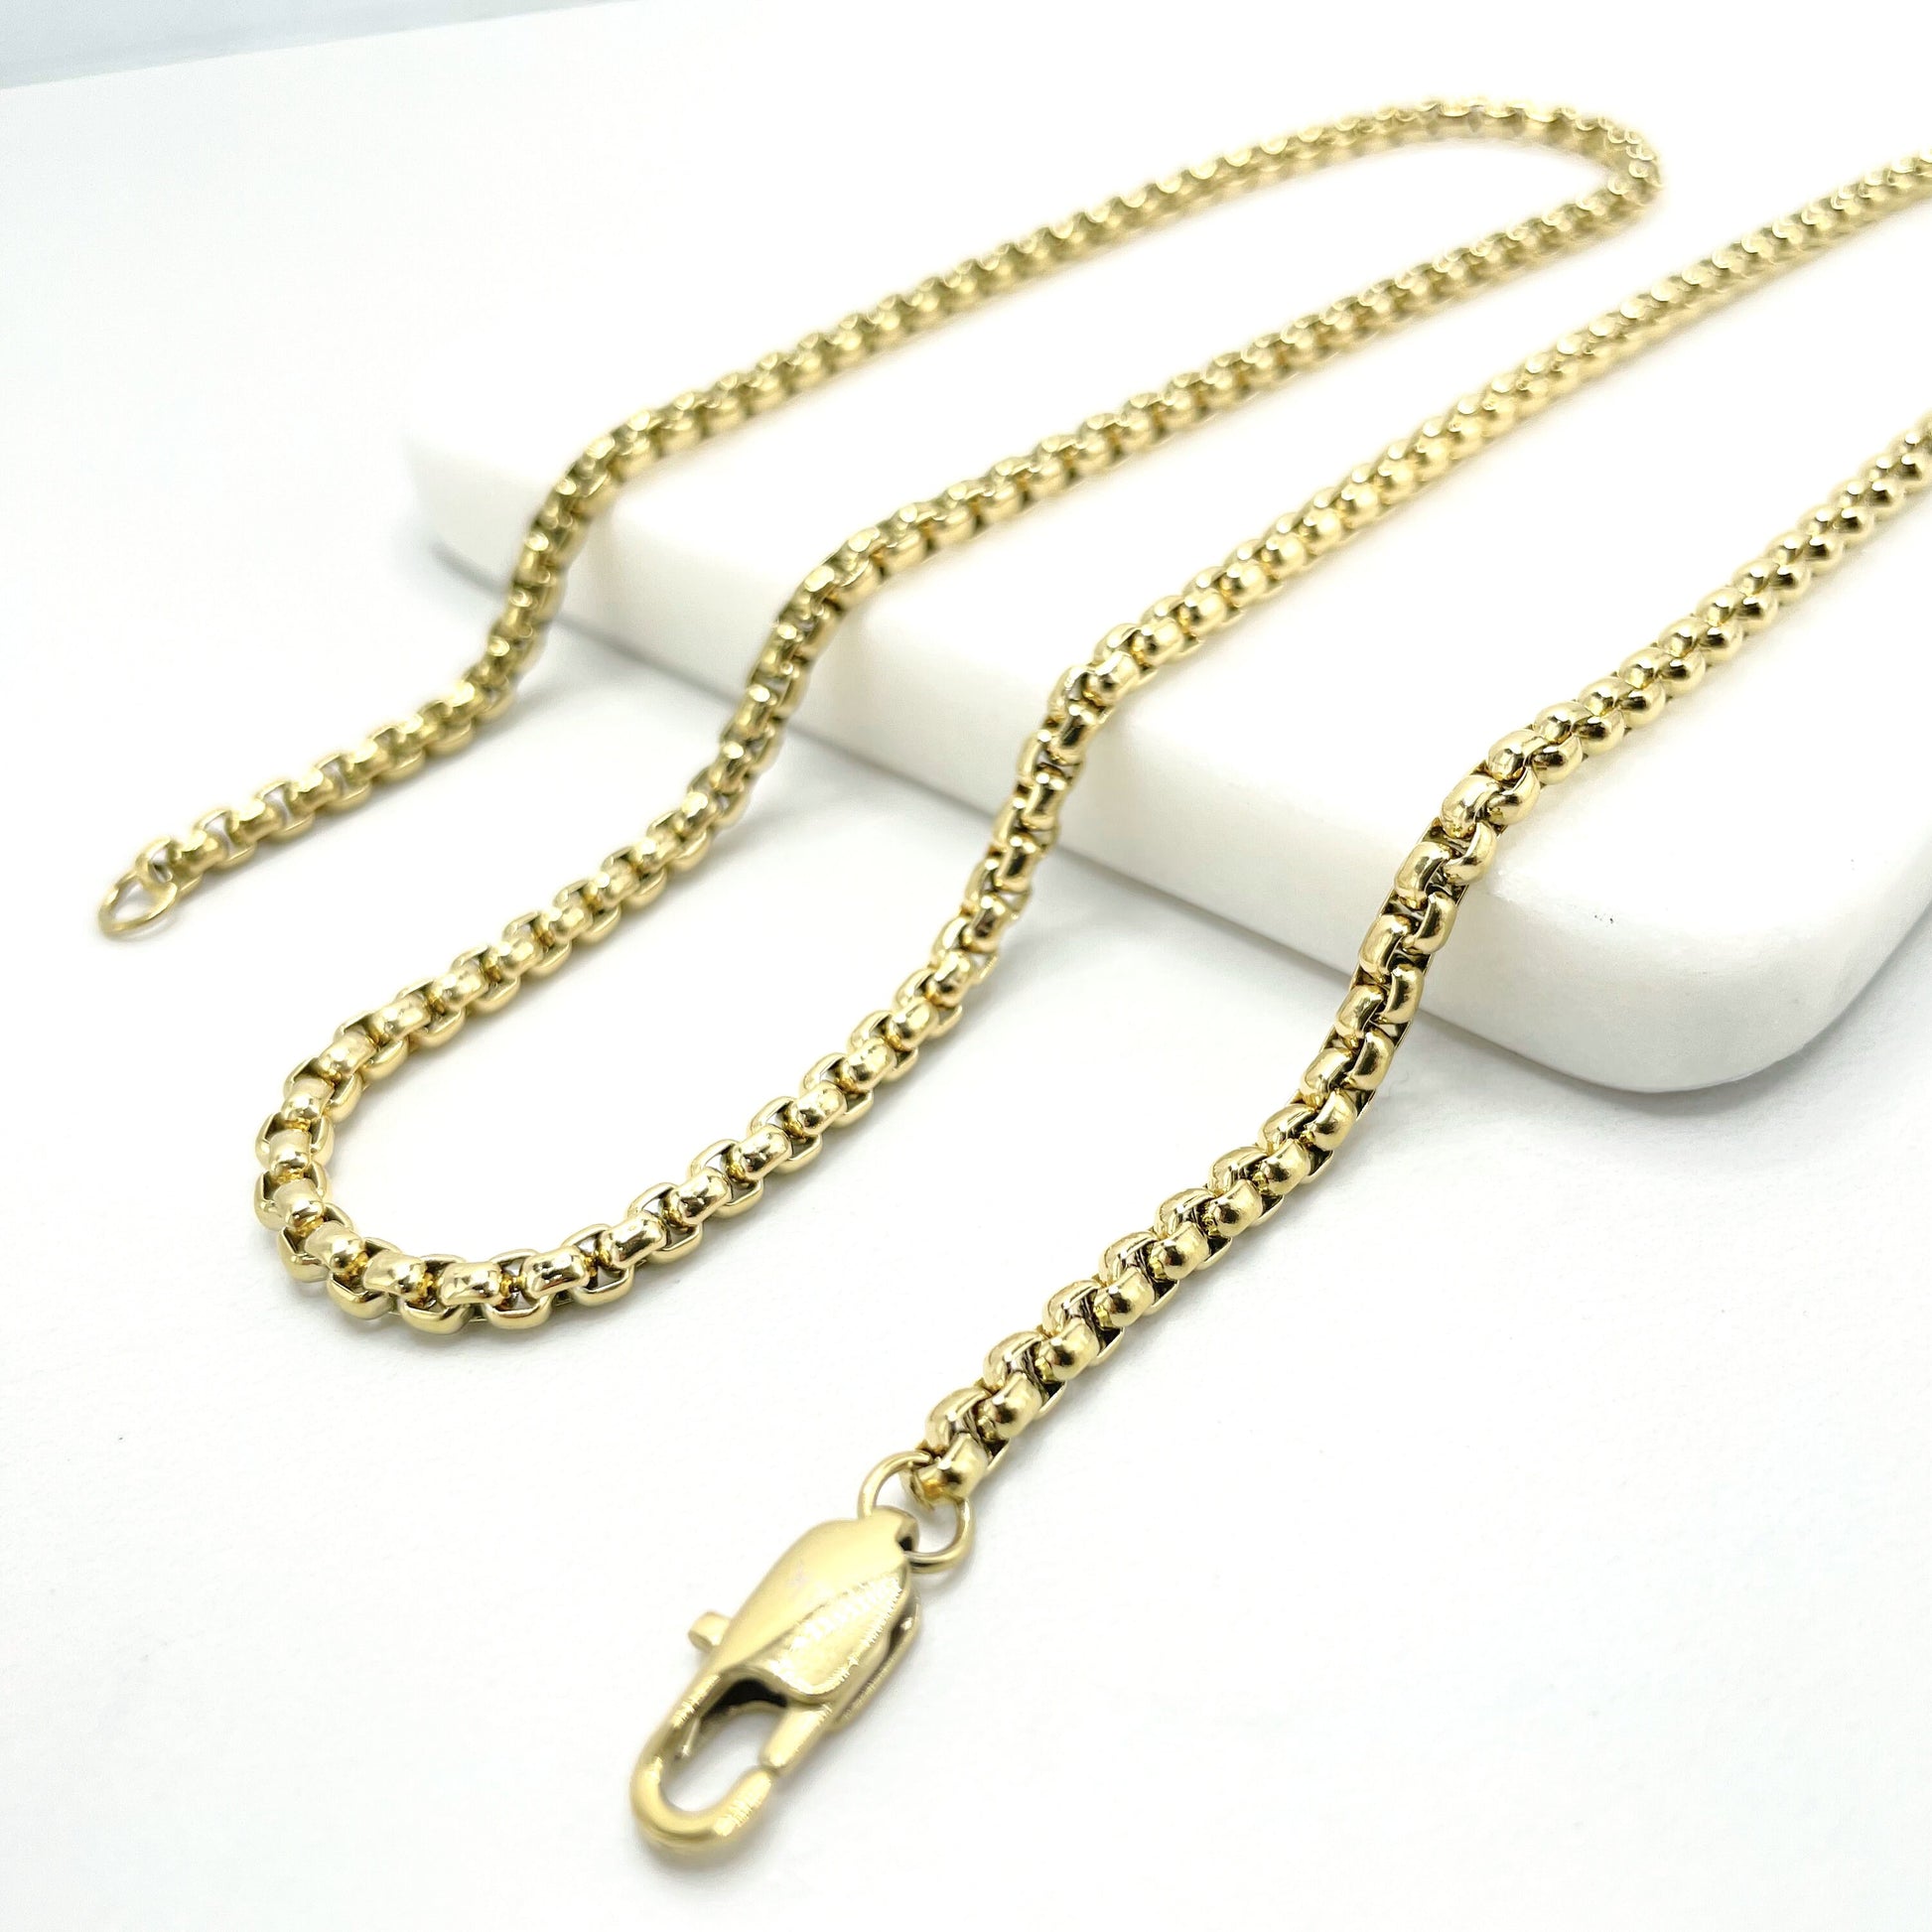 14k Gold Plated On Stainless Steel 3mm Box Chain Link Necklace 24" Long, Unisex Chain, Wholesale Jewelry Making Supplies